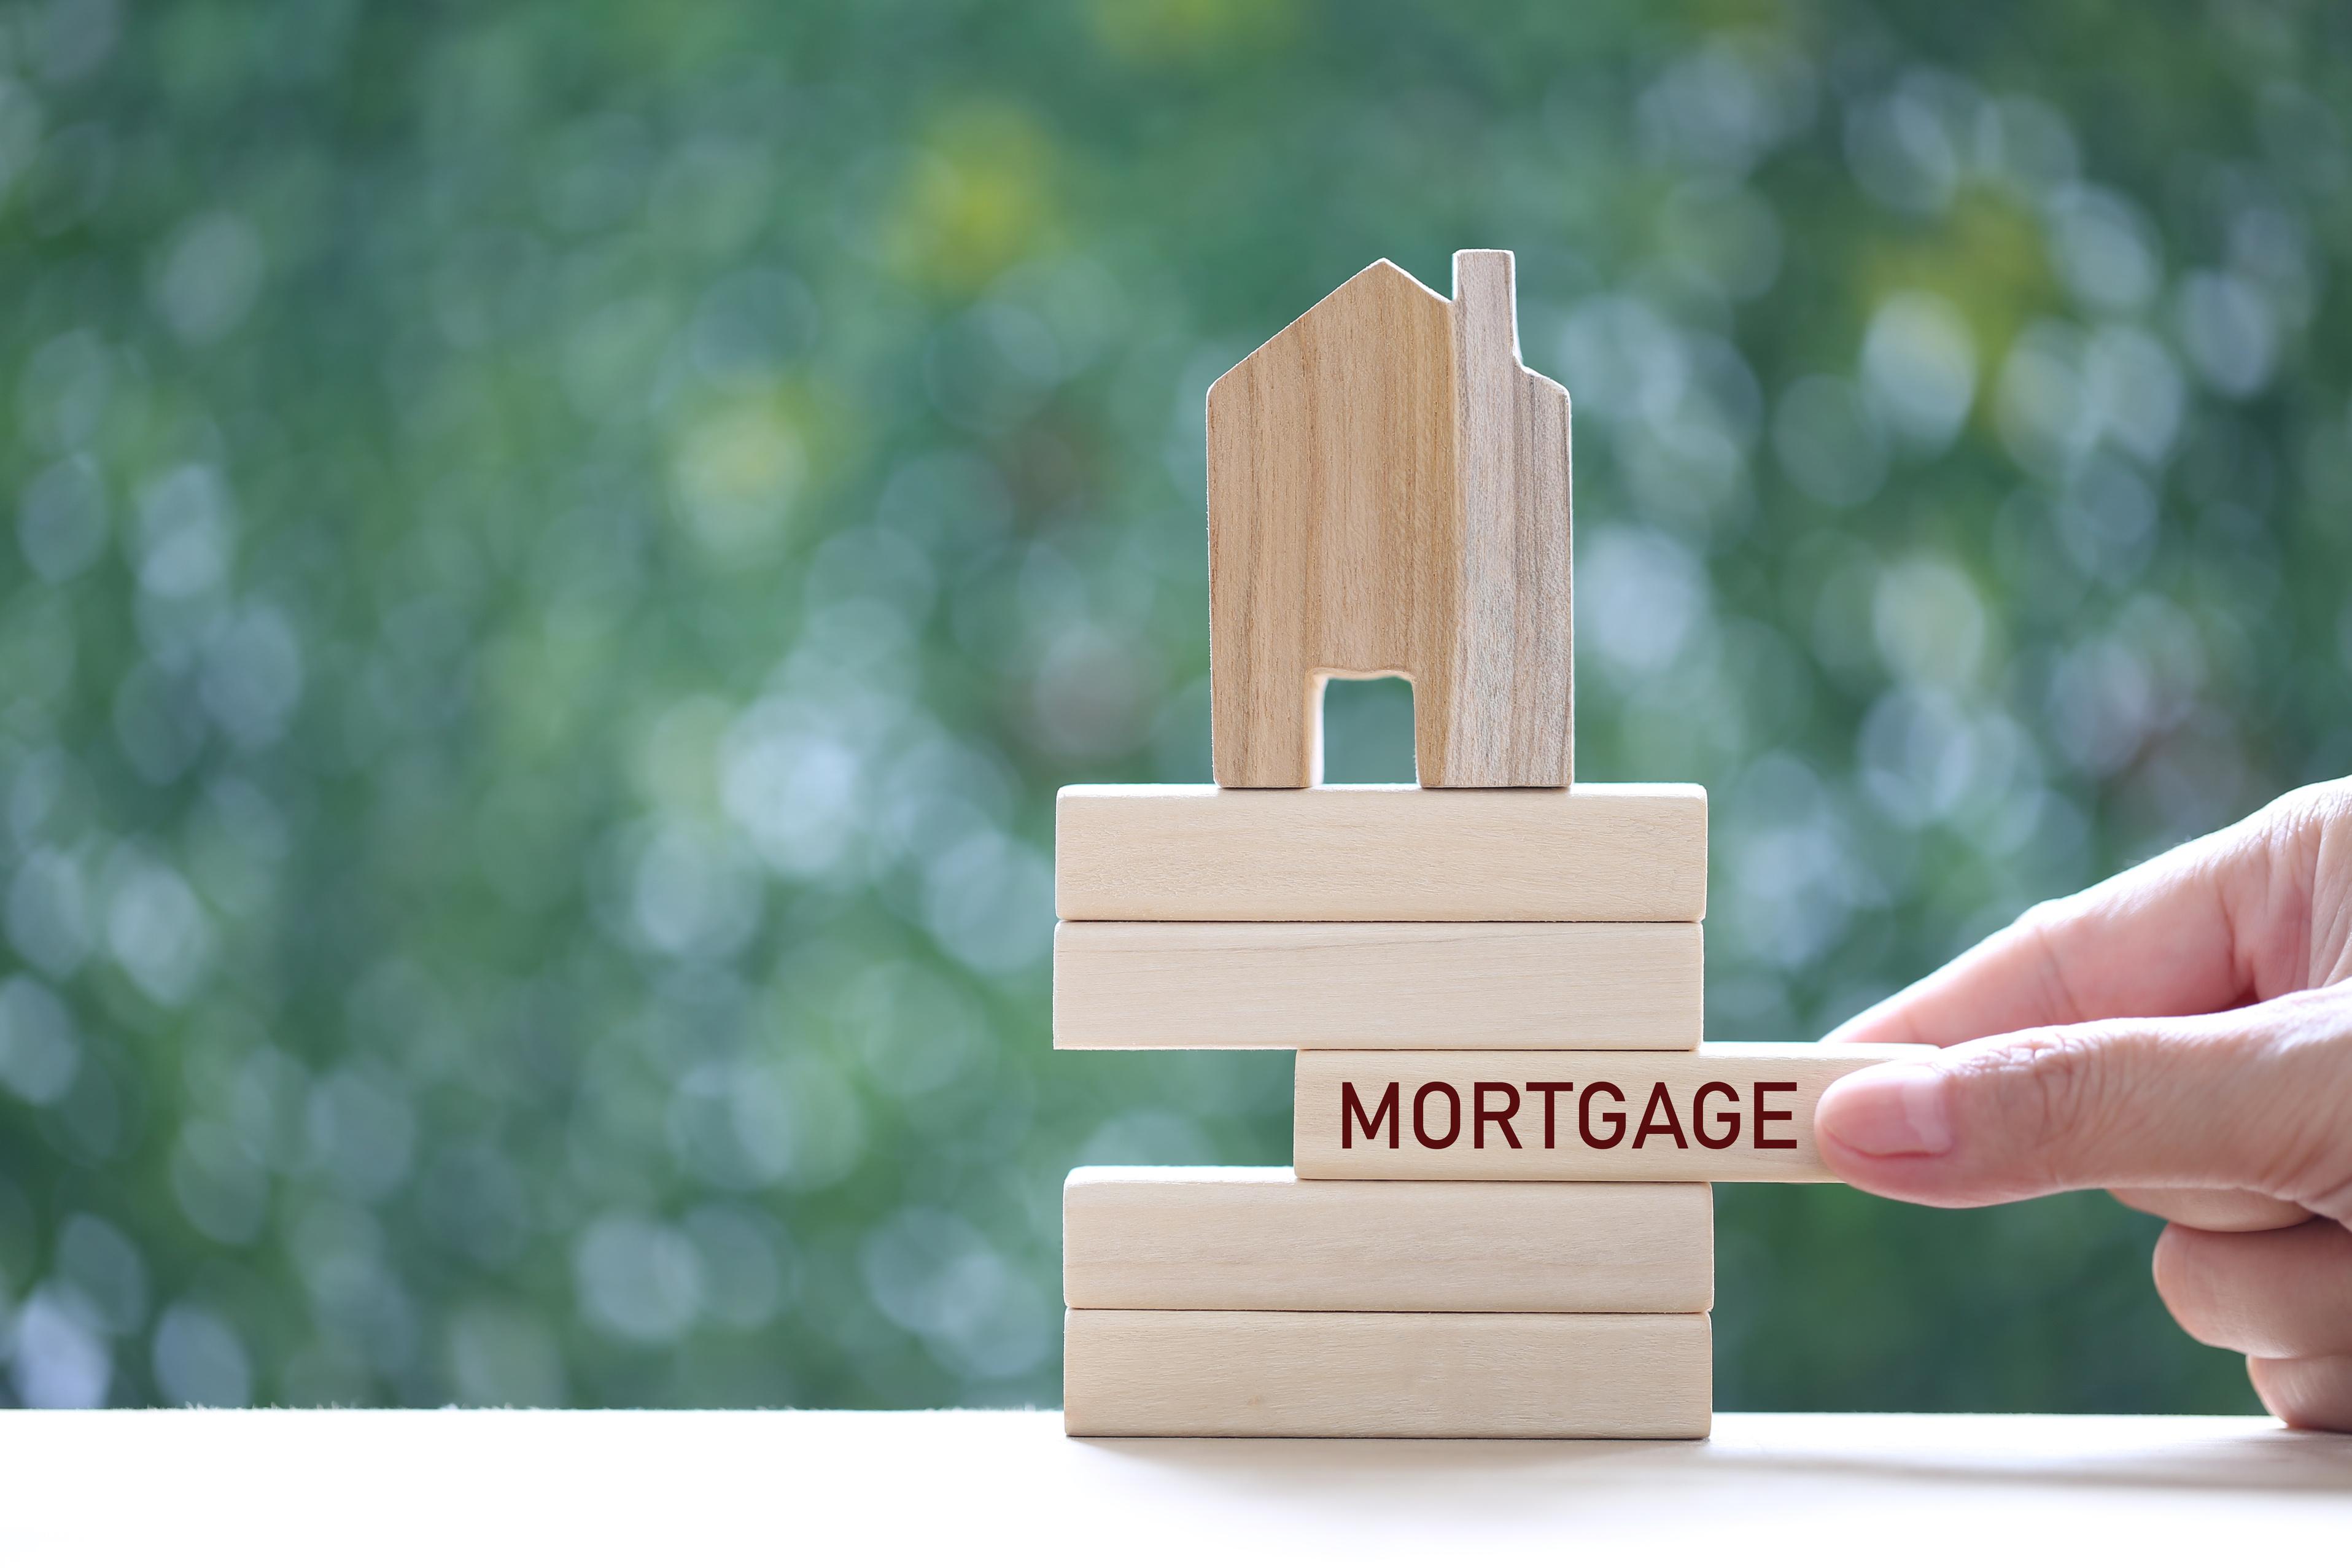 Mortgage,Model House on Wooden Block with Word "MORTGAGE" on Nat